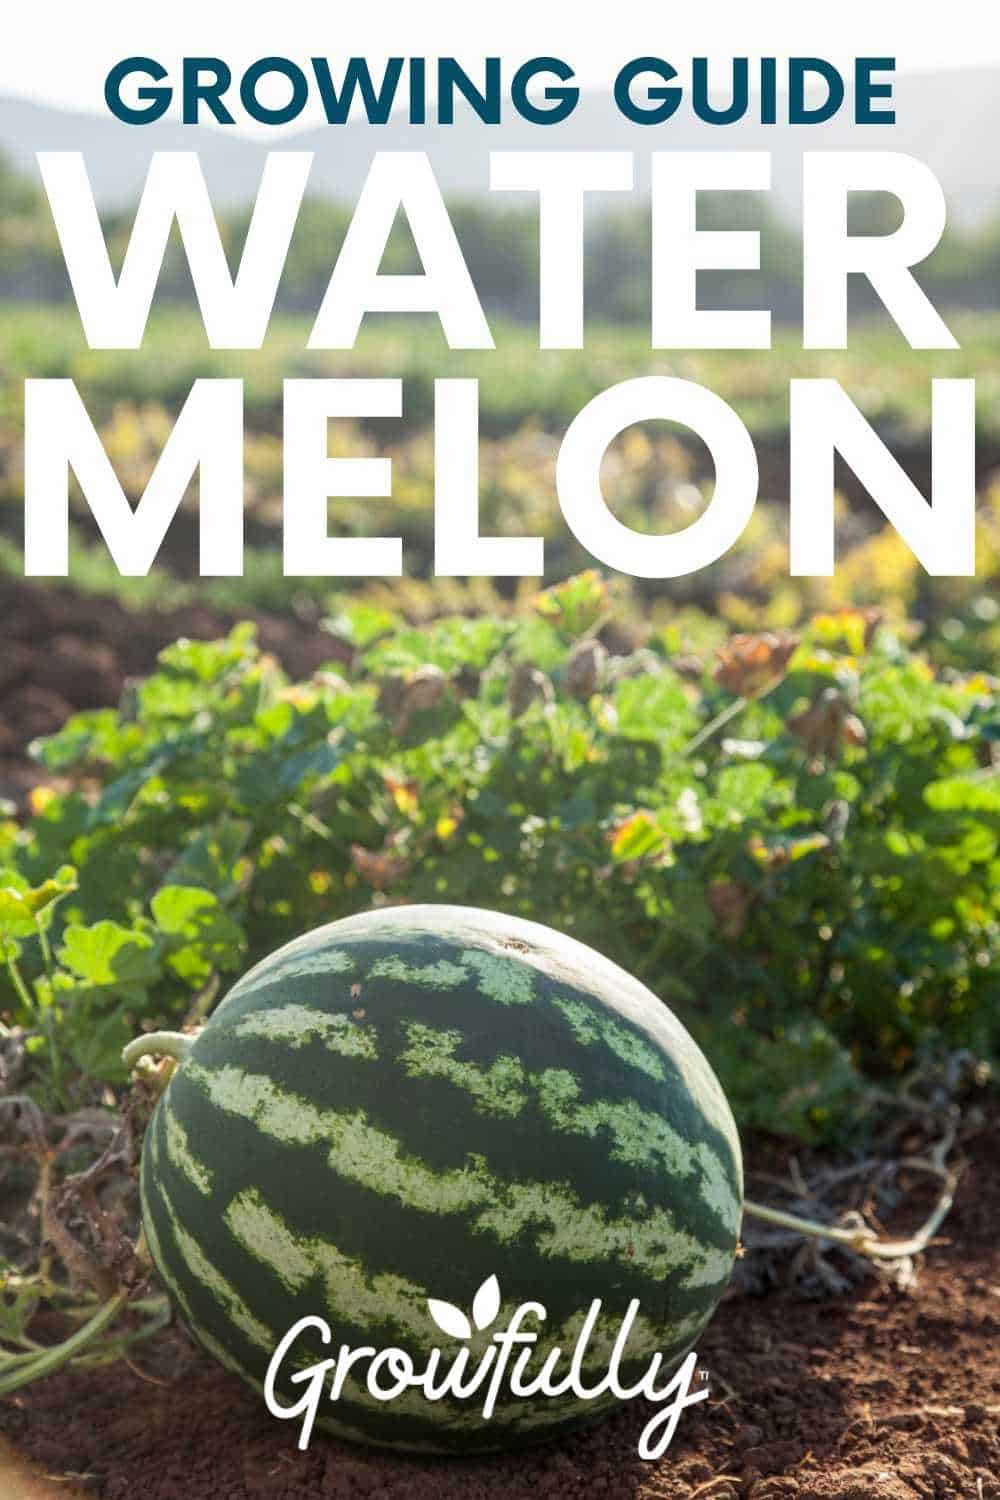 How To Grow Watermelon (Detailed Instructions) - Growfully